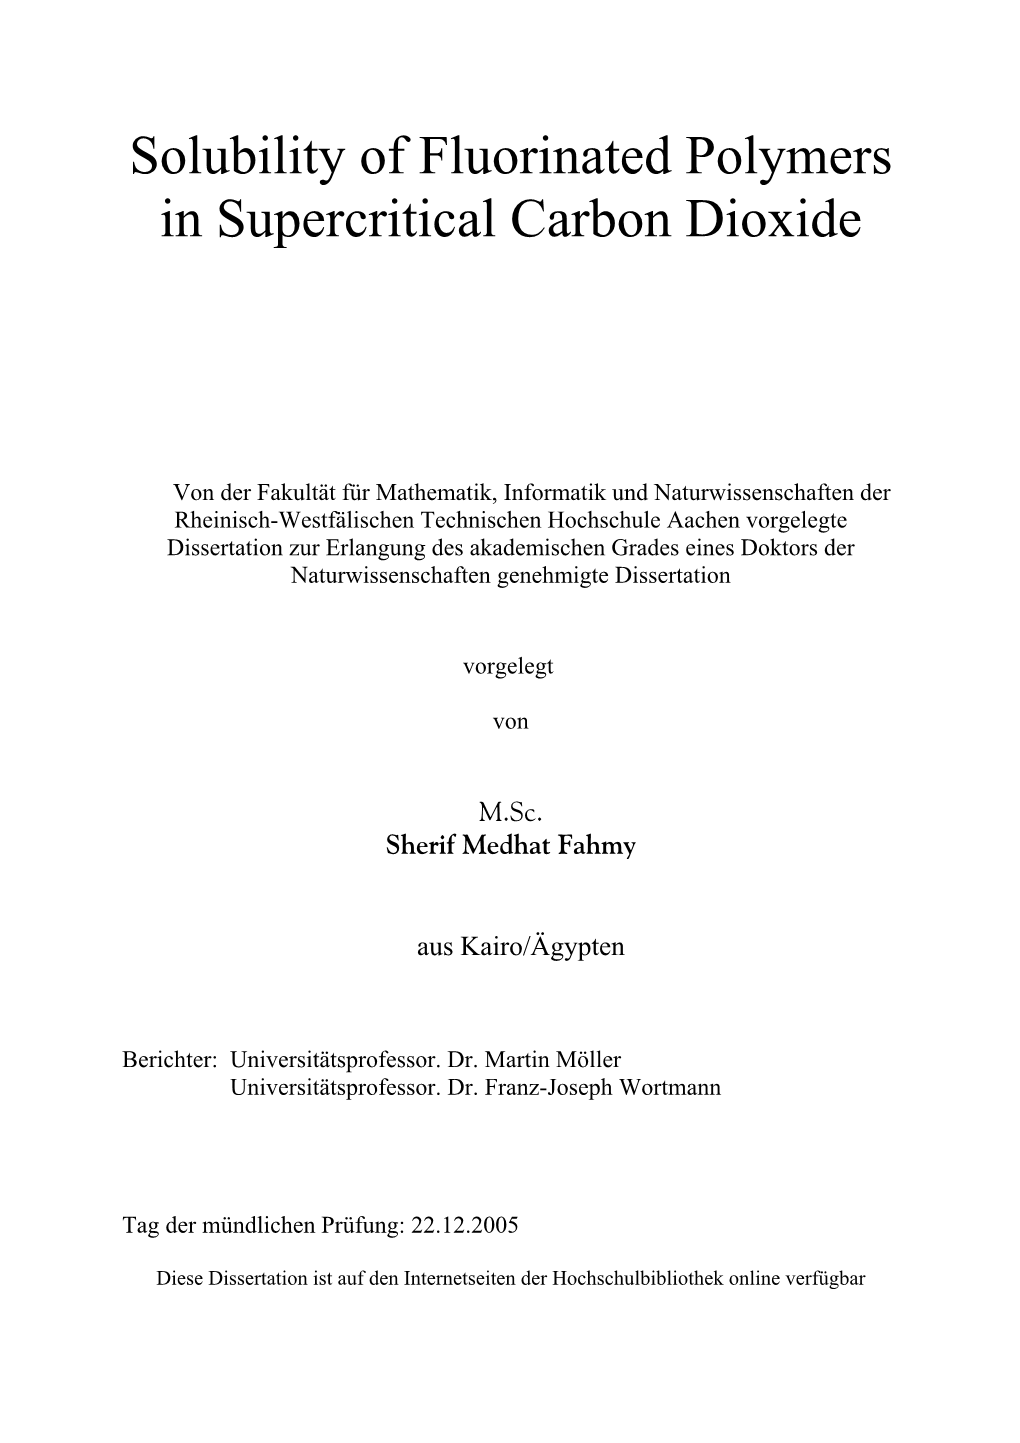 Solubility of Fluorinated Polymers in Supercritical Carbon Dioxide